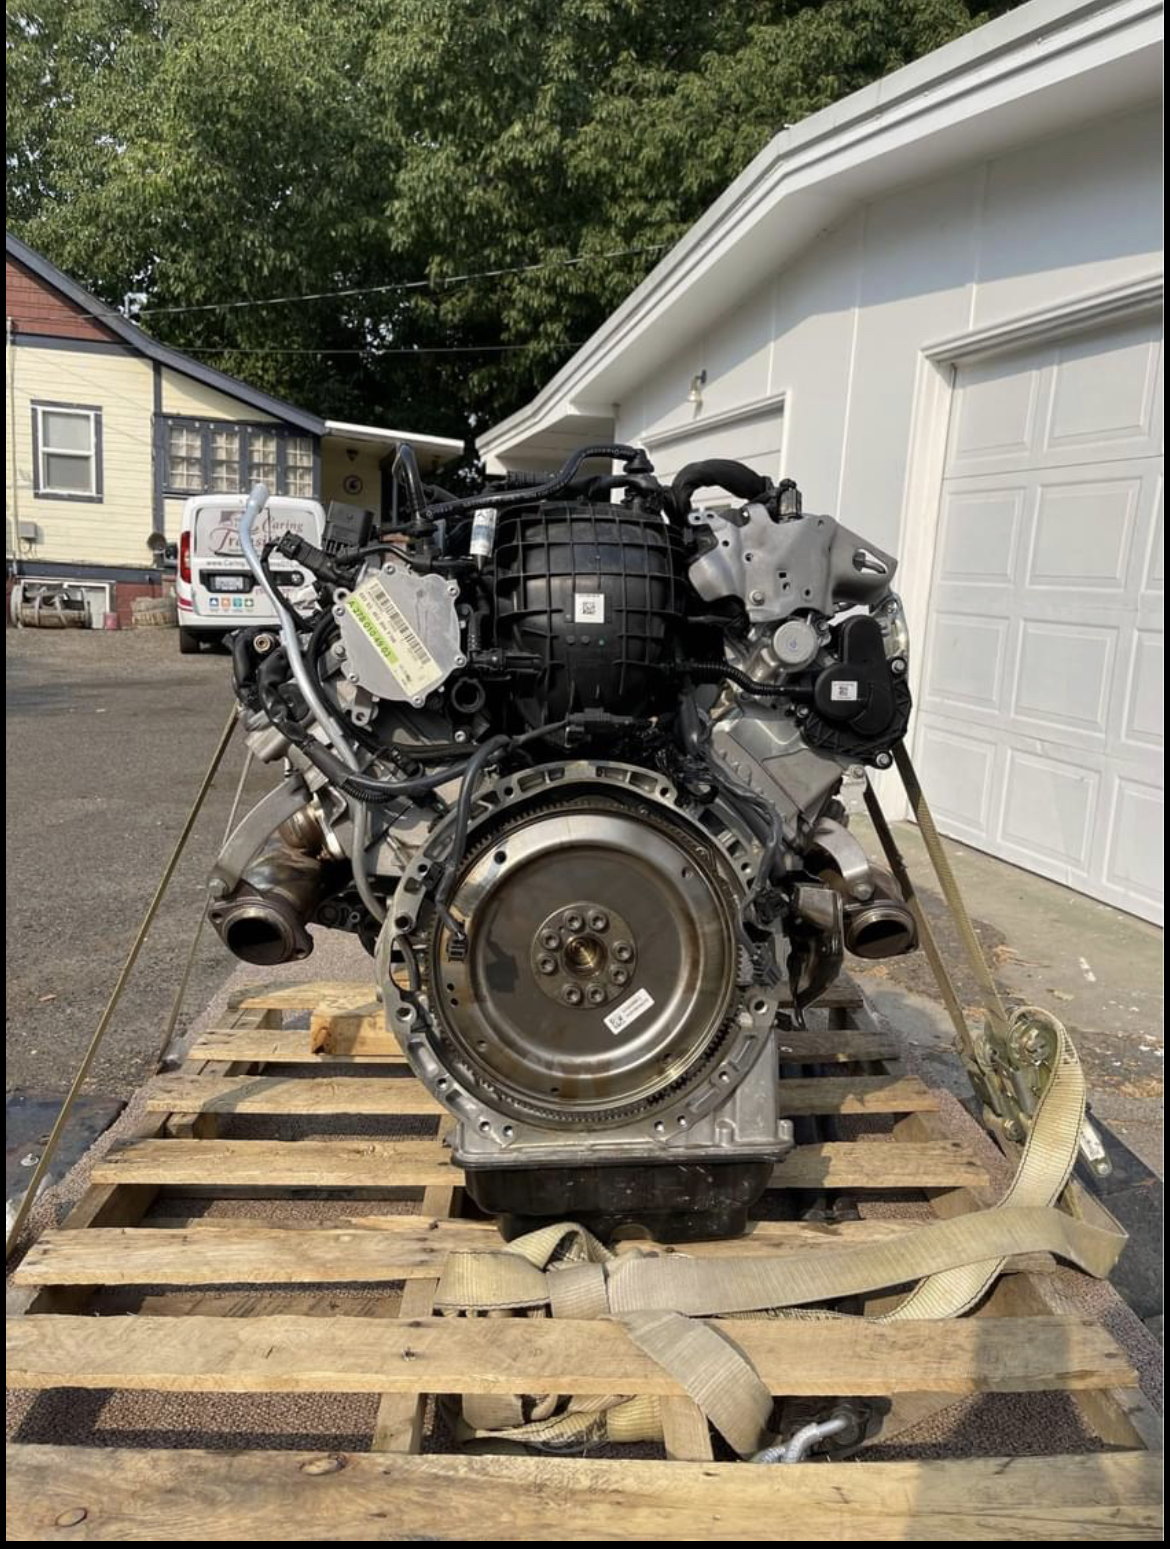 Engine - Complete - V8 Biturbo M278 ENGINE COMPLETE FOR IMMEDIATE SALE-SERIOUS ONLY - Used - 2013 to 2018 Mercedes-Benz GL550 - Toppenish, WA 98948, United States